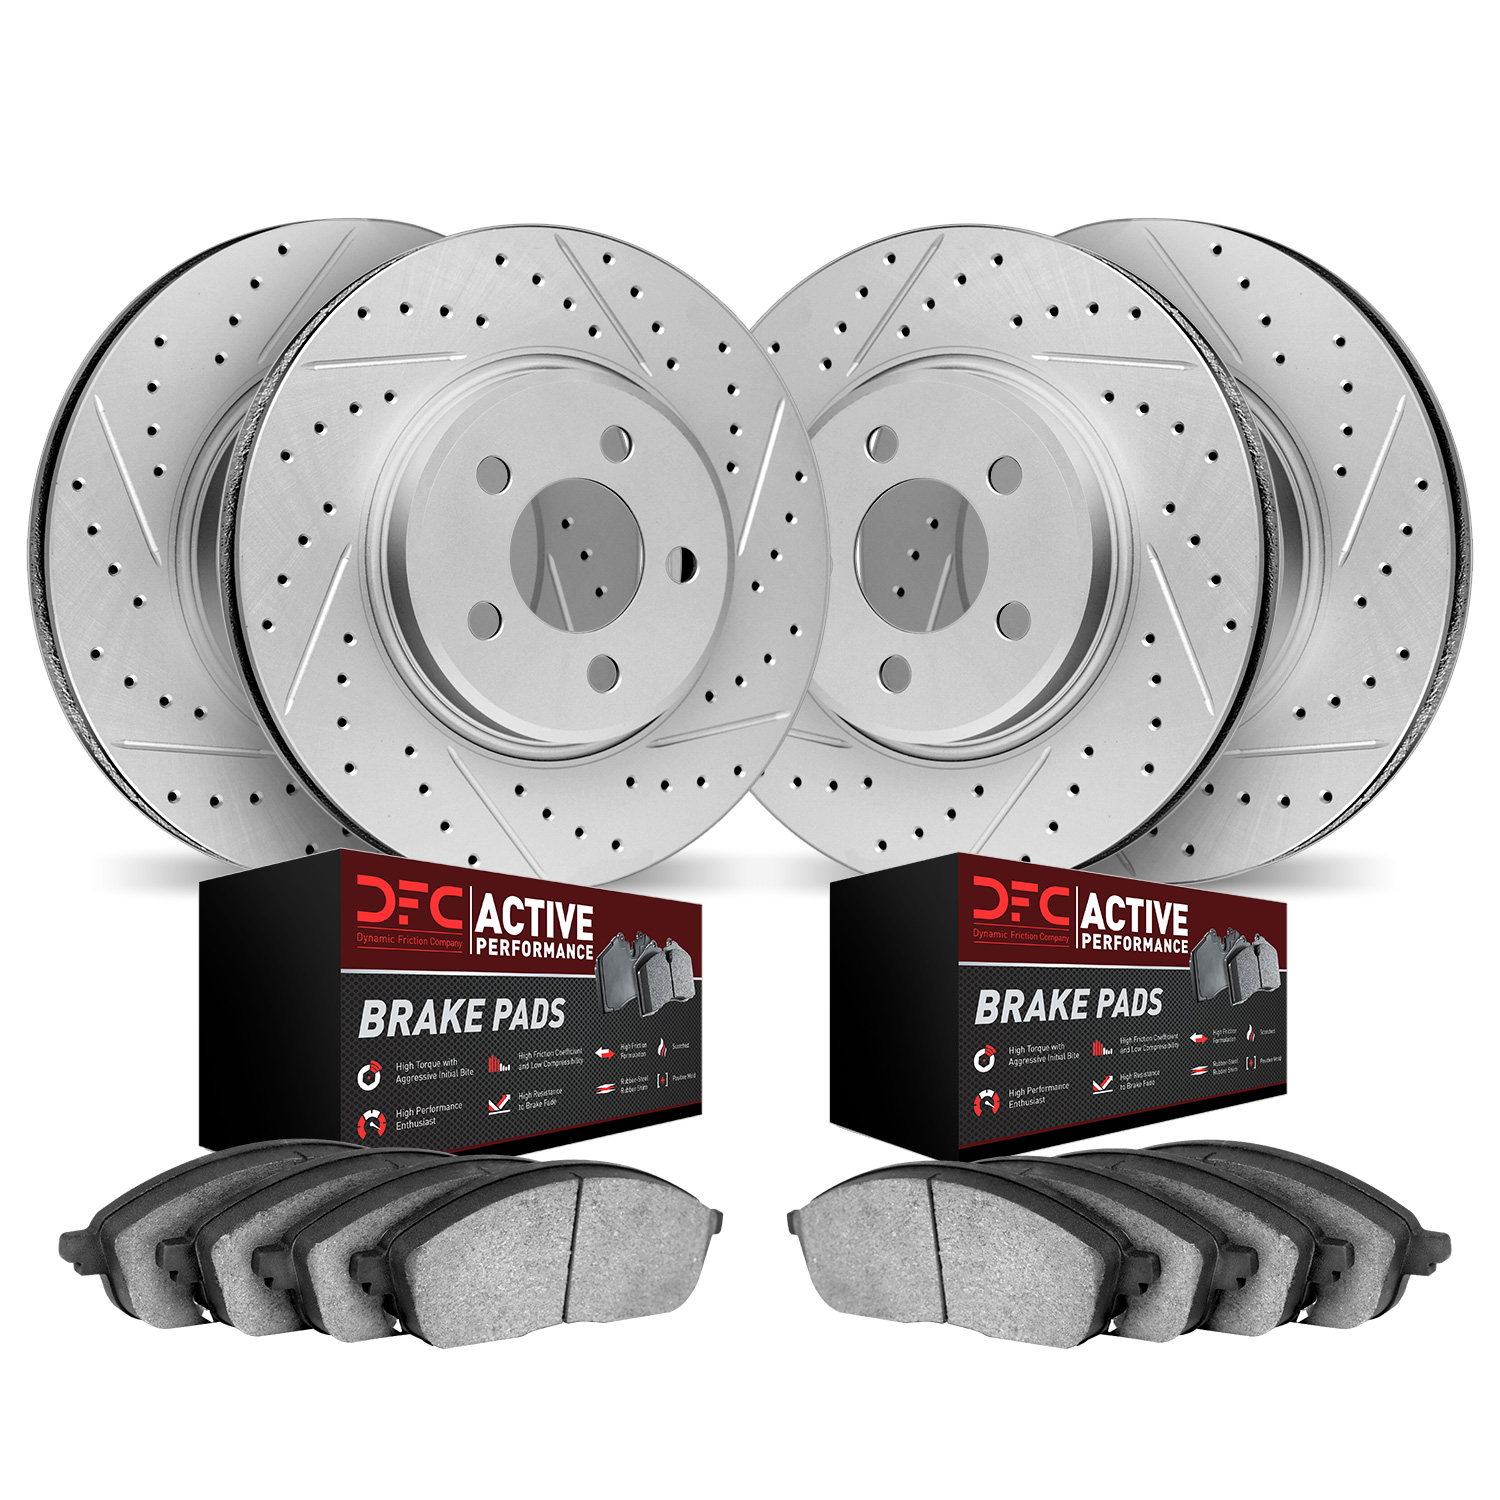 2704-31125 Geoperformance Drilled/Slotted Brake Rotors with Active Performance Pads Kit, Fits Select BMW, Position: Front and Re